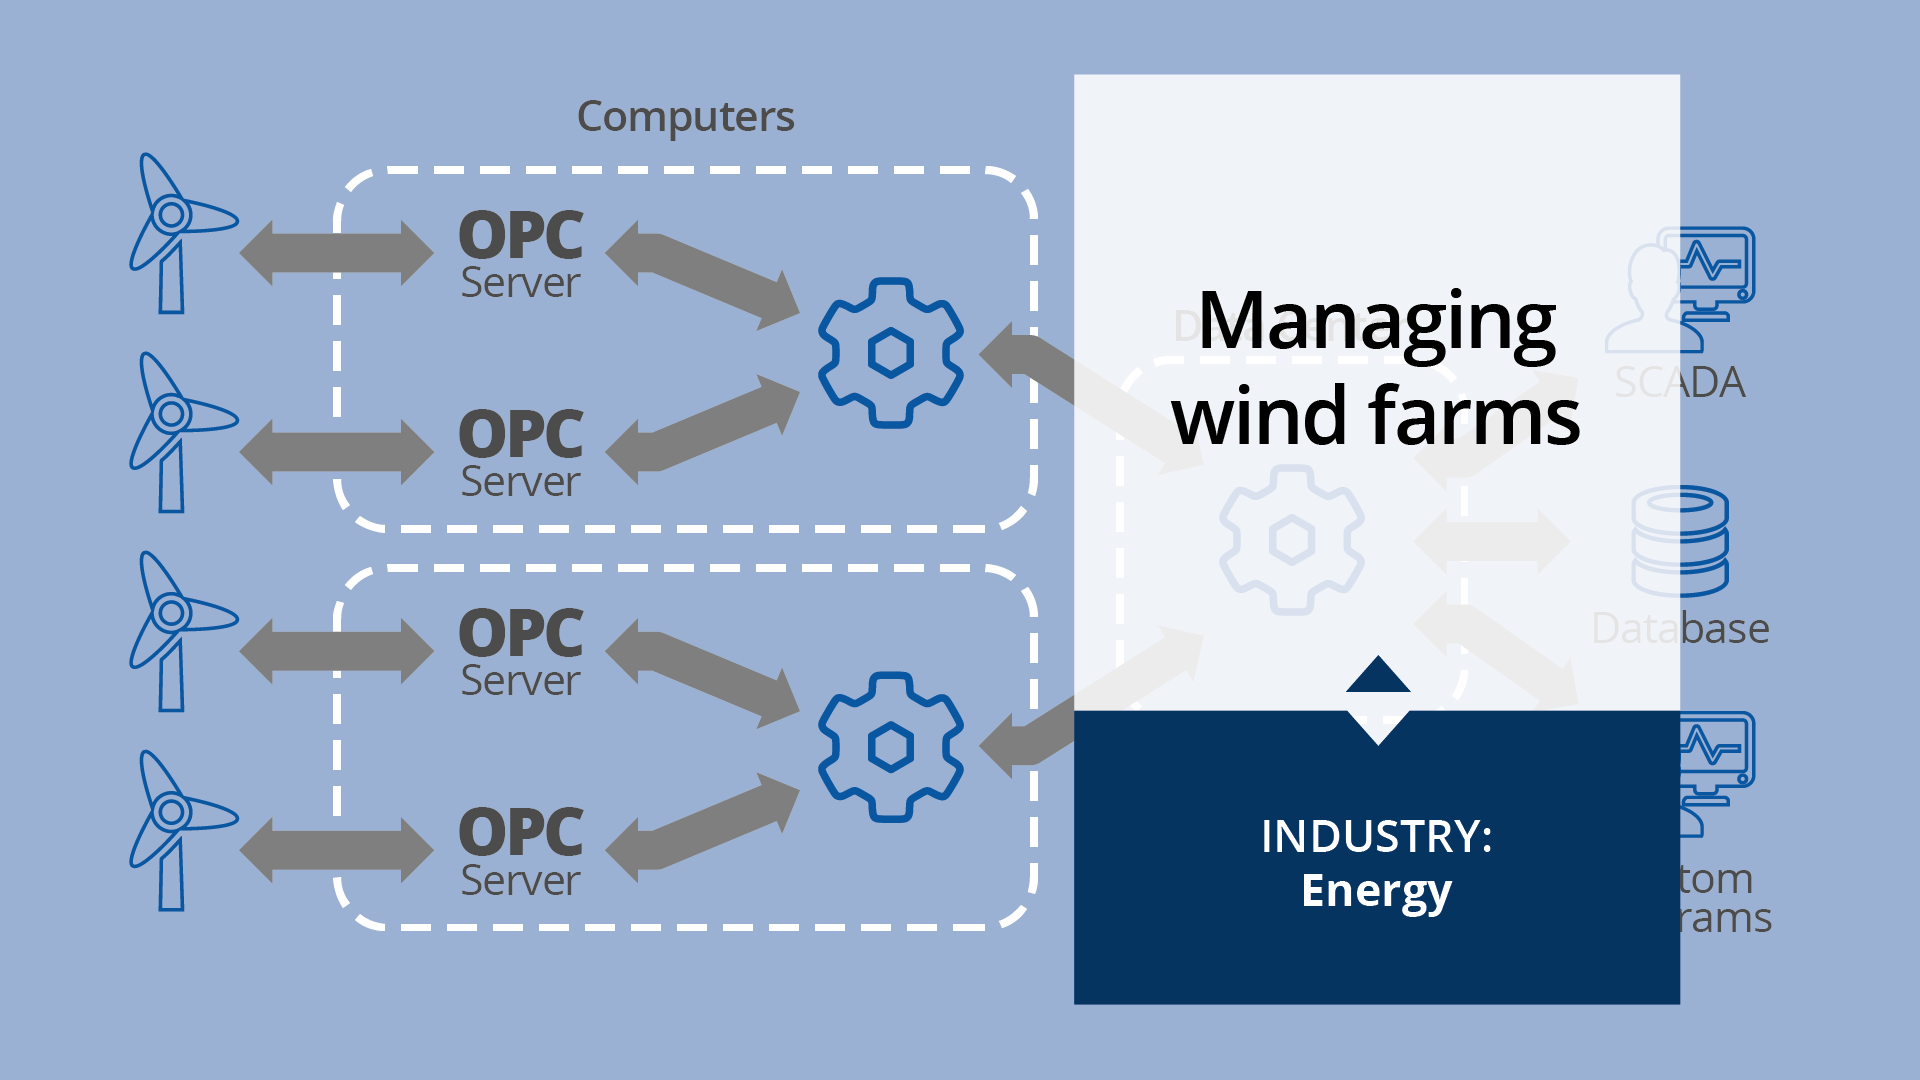 Managing wind farms use case